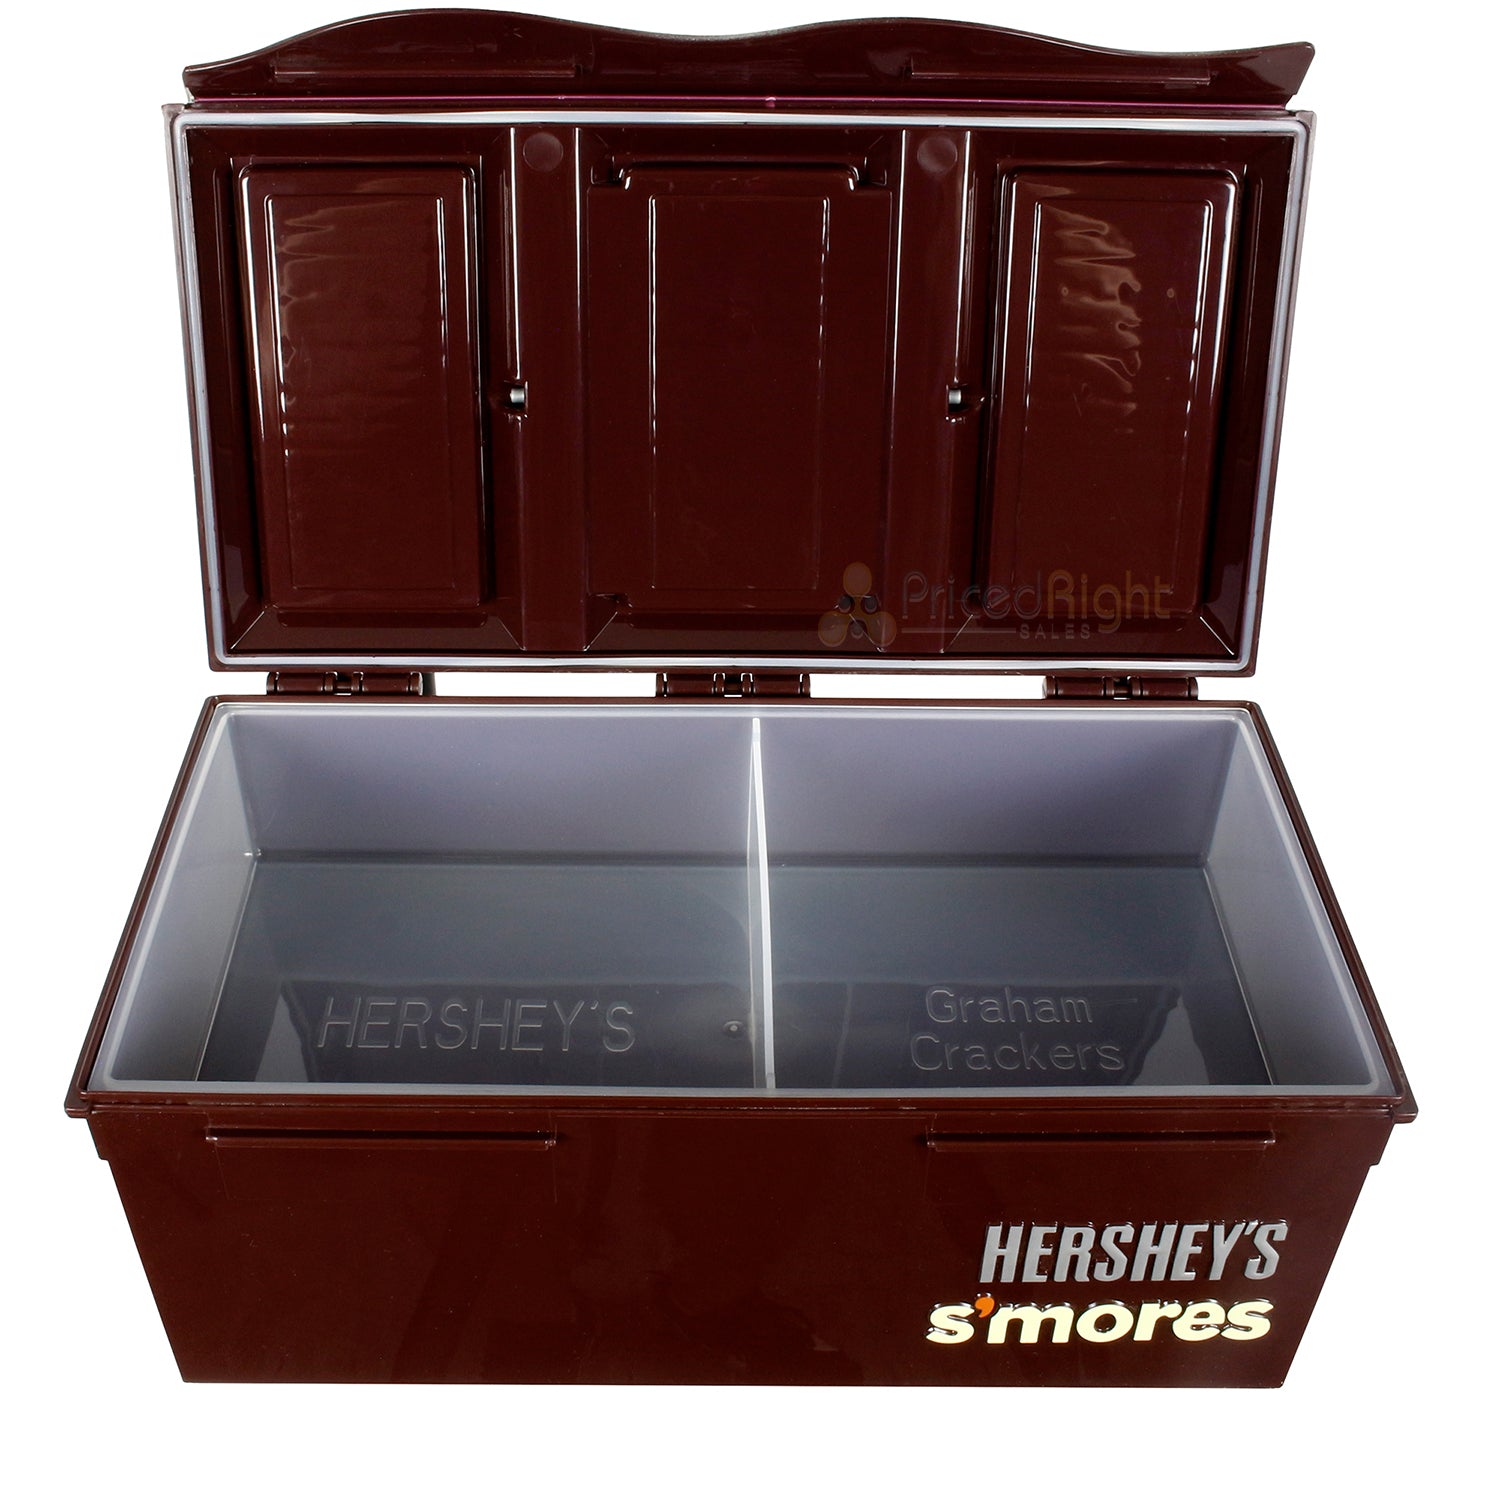 Hershey S'mores On-the-Go Caddy with Removable Storage Tray Carrying Handle